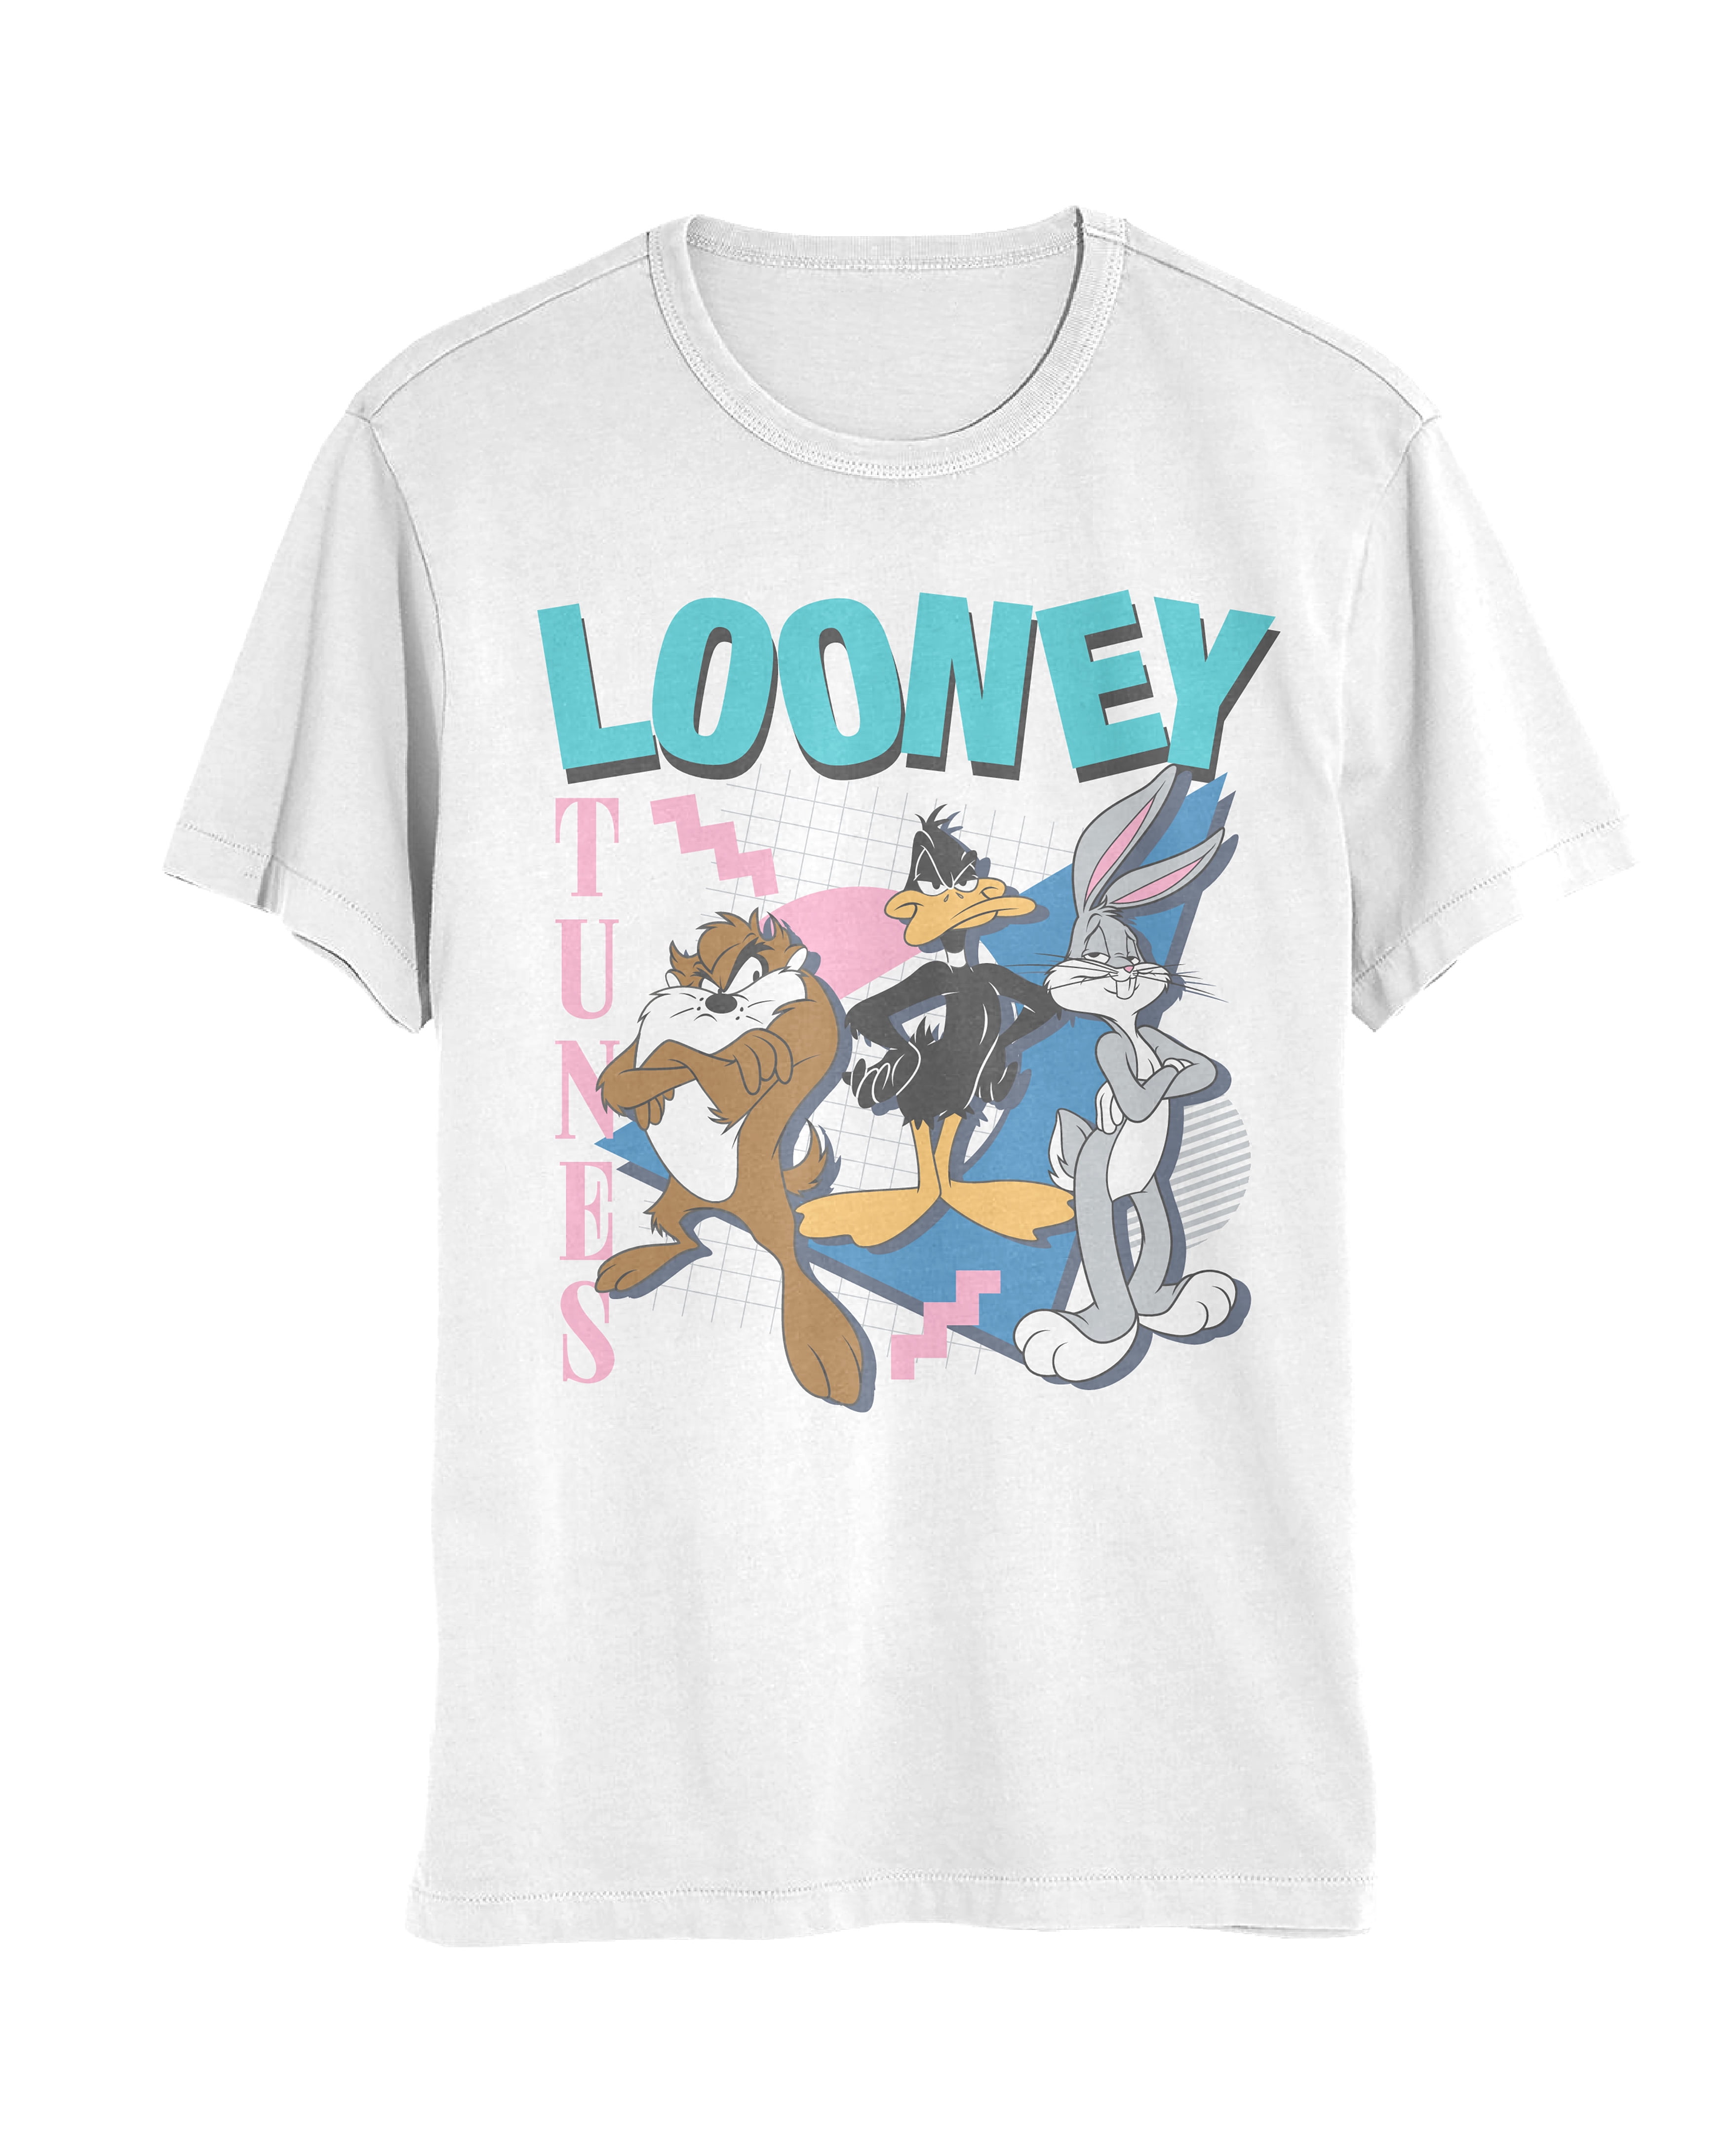 Bunny Daffy Bugs Mens Tunes Short T-Shirt Womens S-XXL) (White, Sleeve and Looney Taz, and